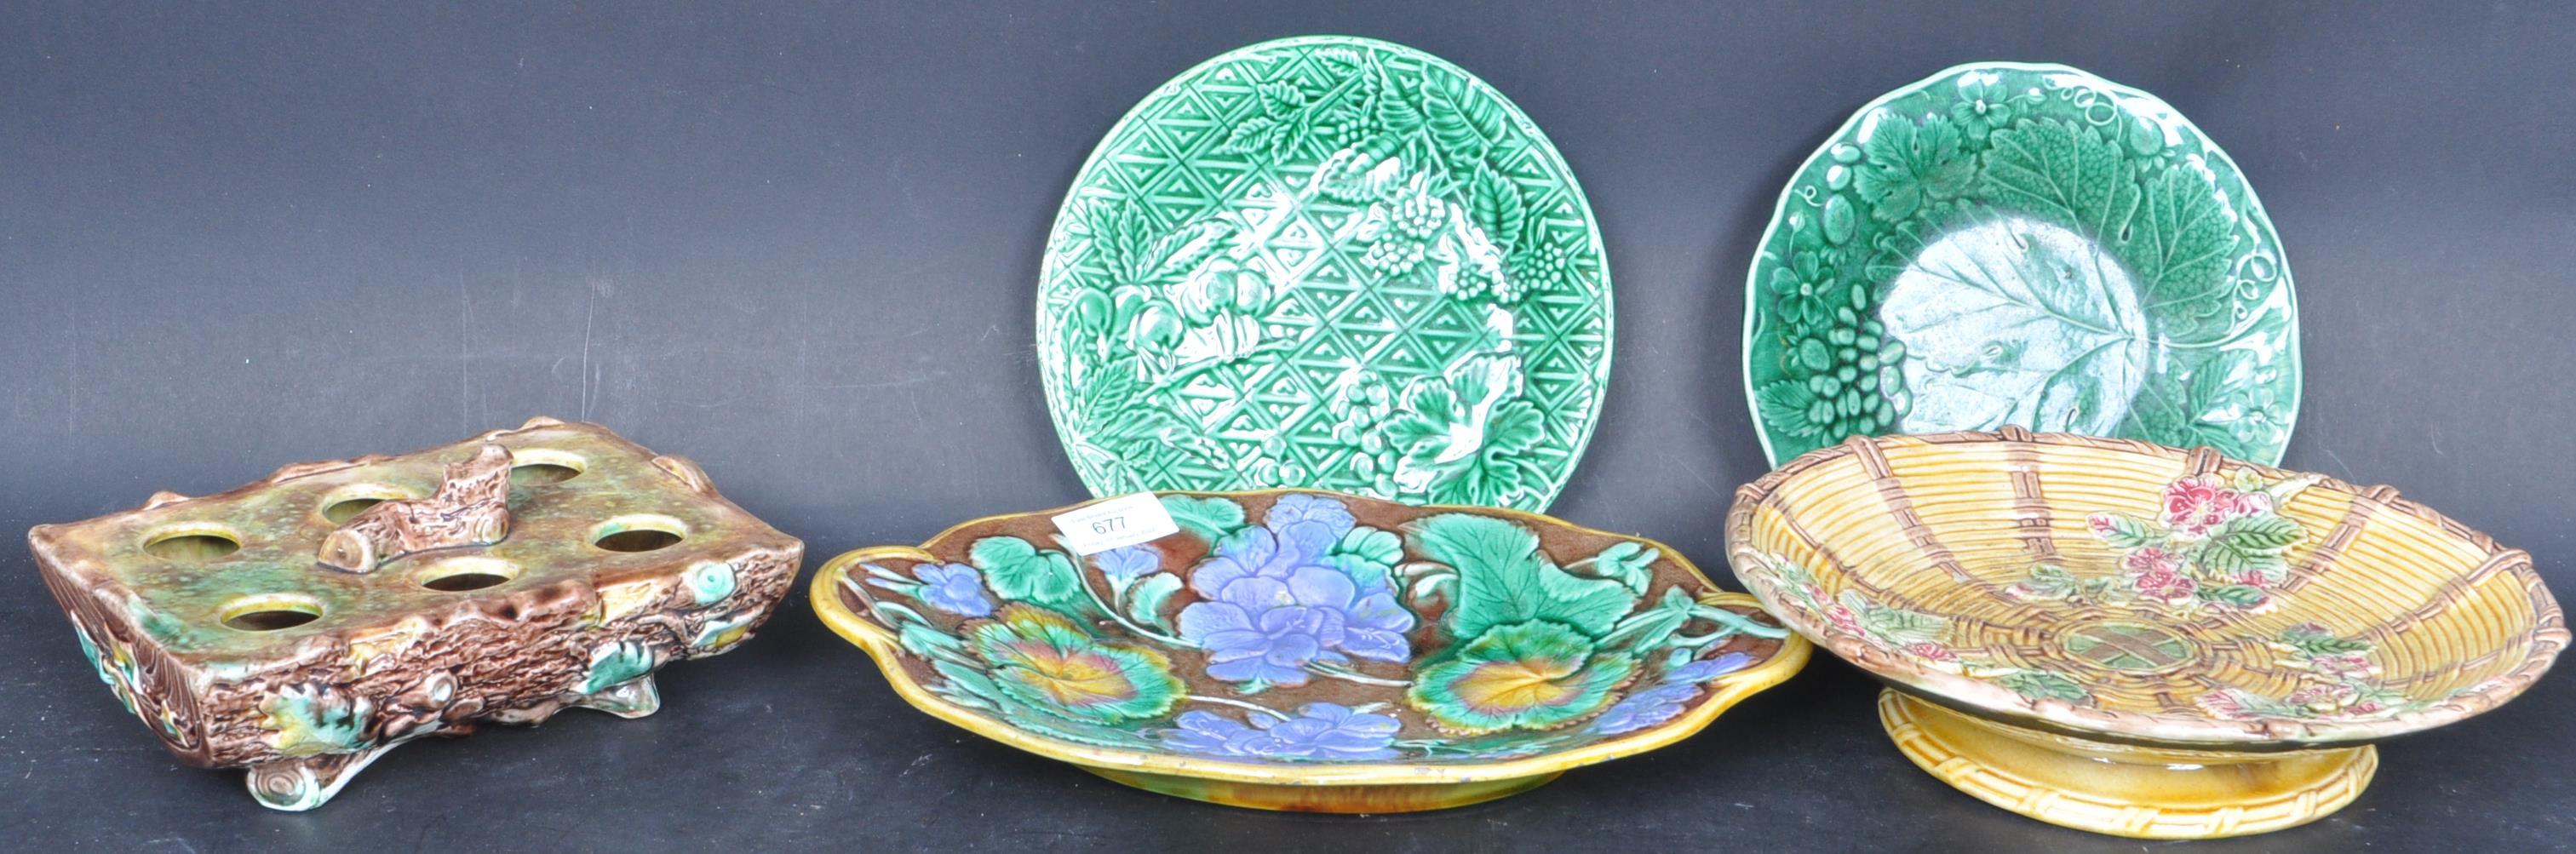 COLLECTION OF VICTORIAN MAJOLICA CERAMICS - Image 2 of 13